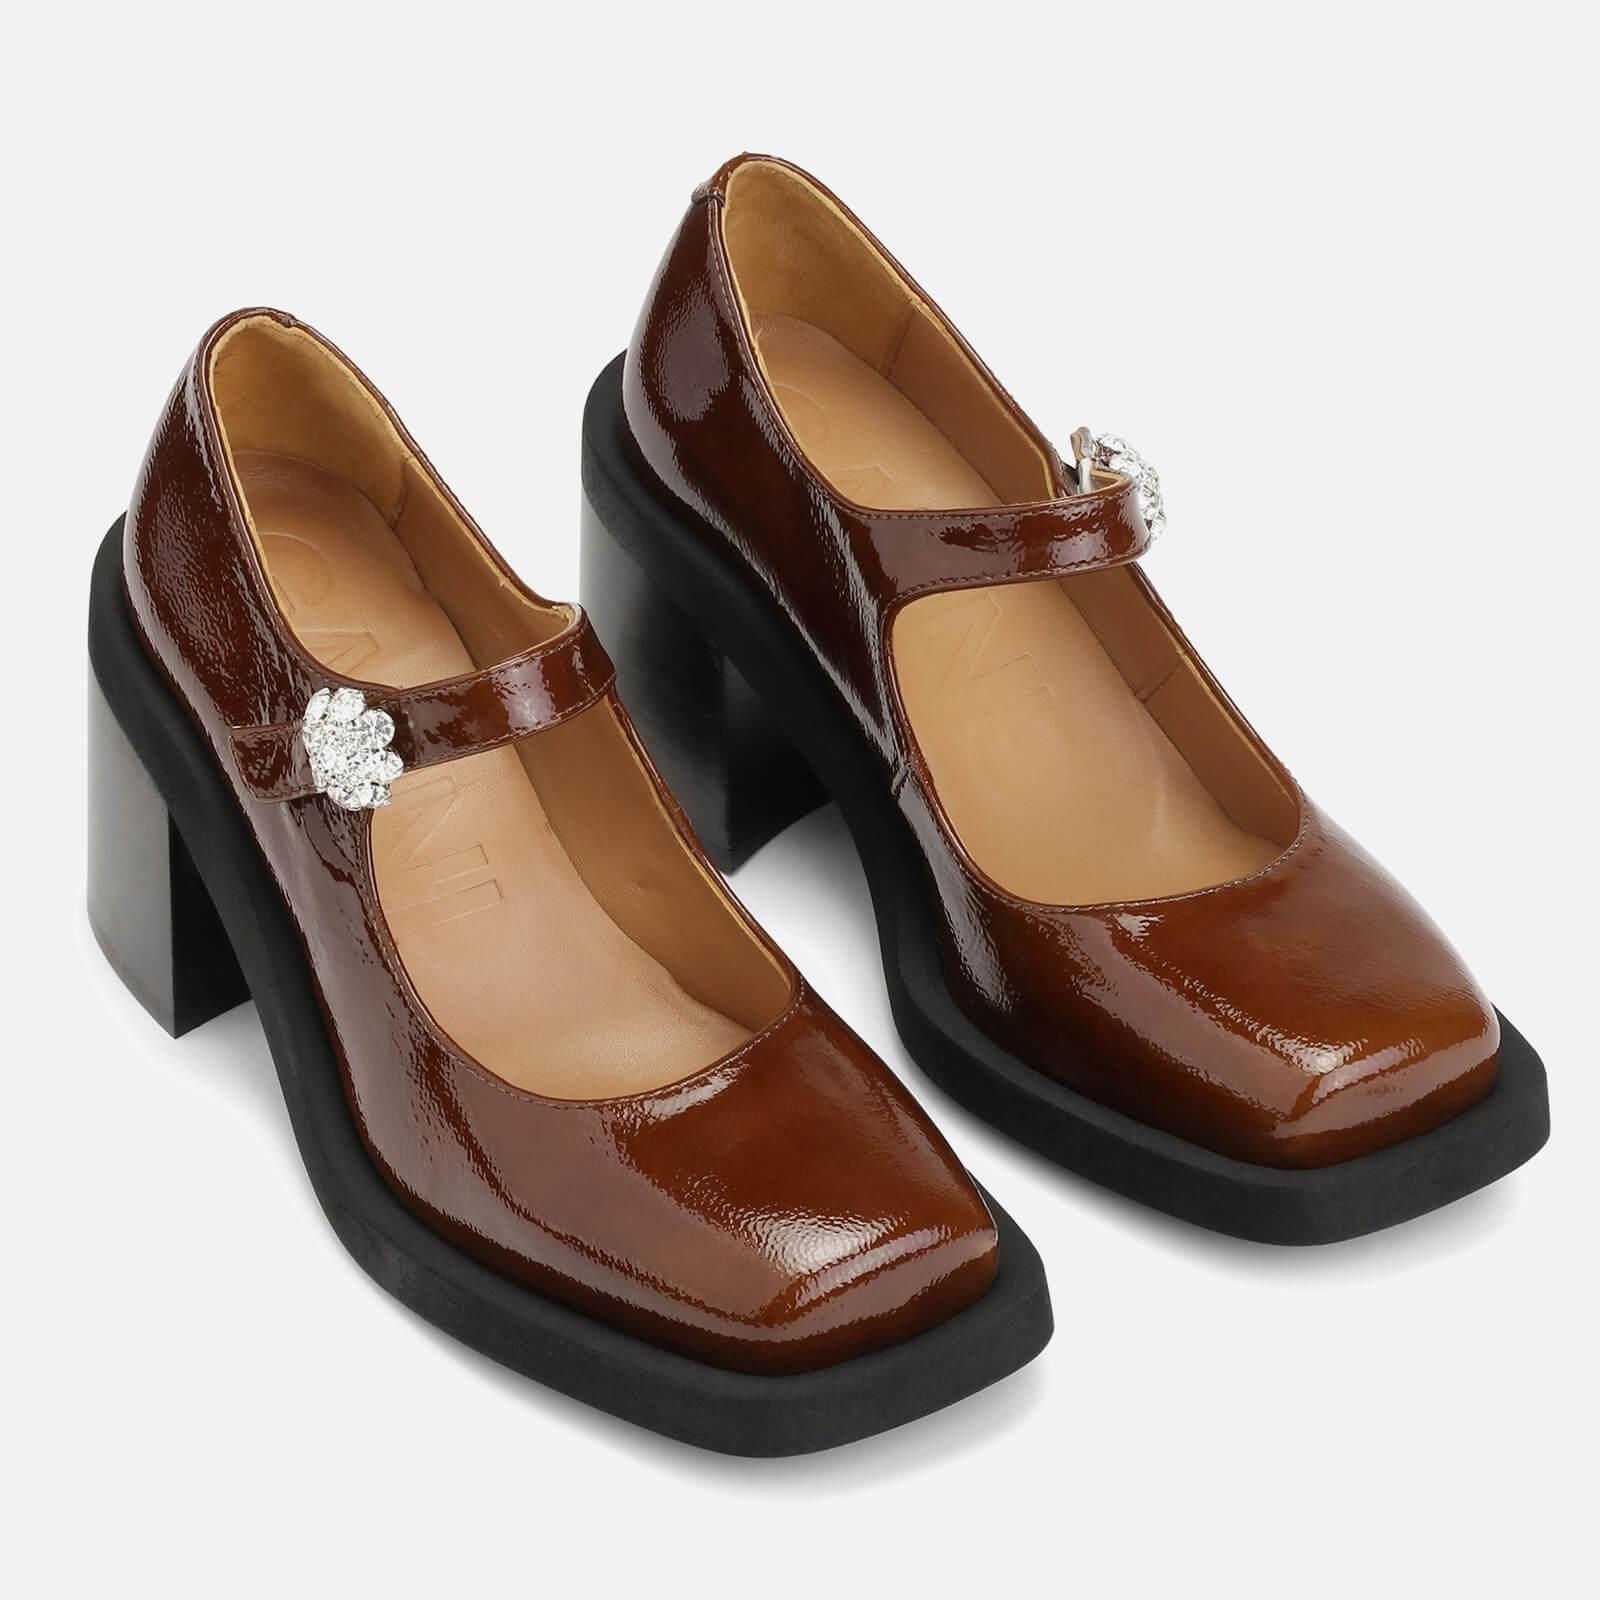 Ganni Square Toe Heeled Mary Jane Leather Shoes in Brown | Lyst